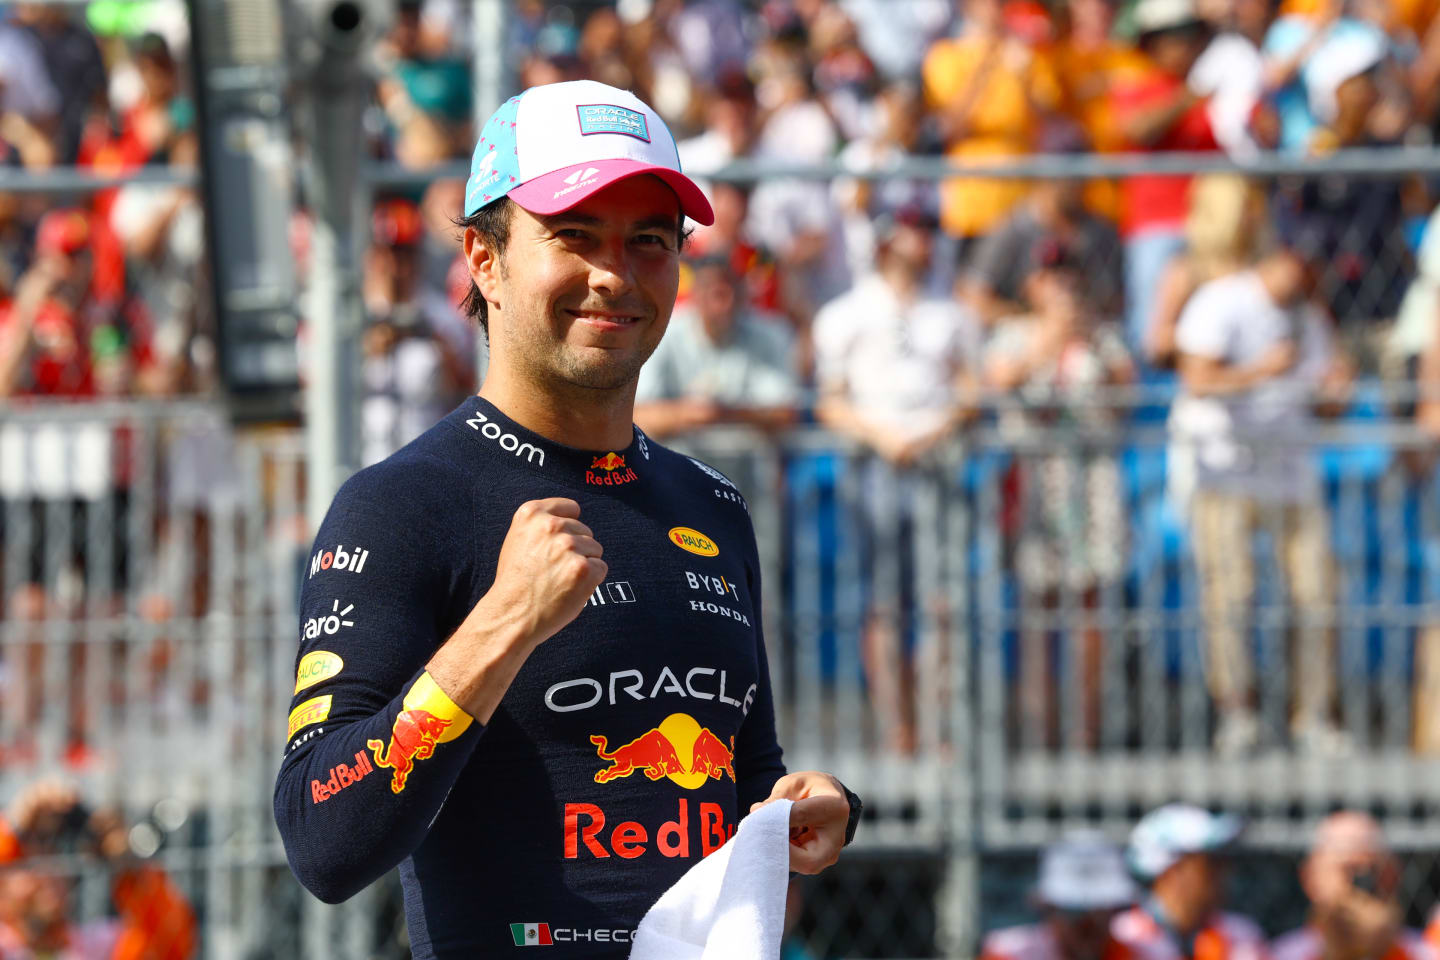 MIAMI, FLORIDA - MAY 06: Pole position qualifier Sergio Perez of Mexico and Oracle Red Bull Racing celebrates in parc ferme during qualifying ahead of the F1 Grand Prix of Miami at Miami International Autodrome on May 06, 2023 in Miami, Florida. (Photo by Mark Thompson/Getty Images)